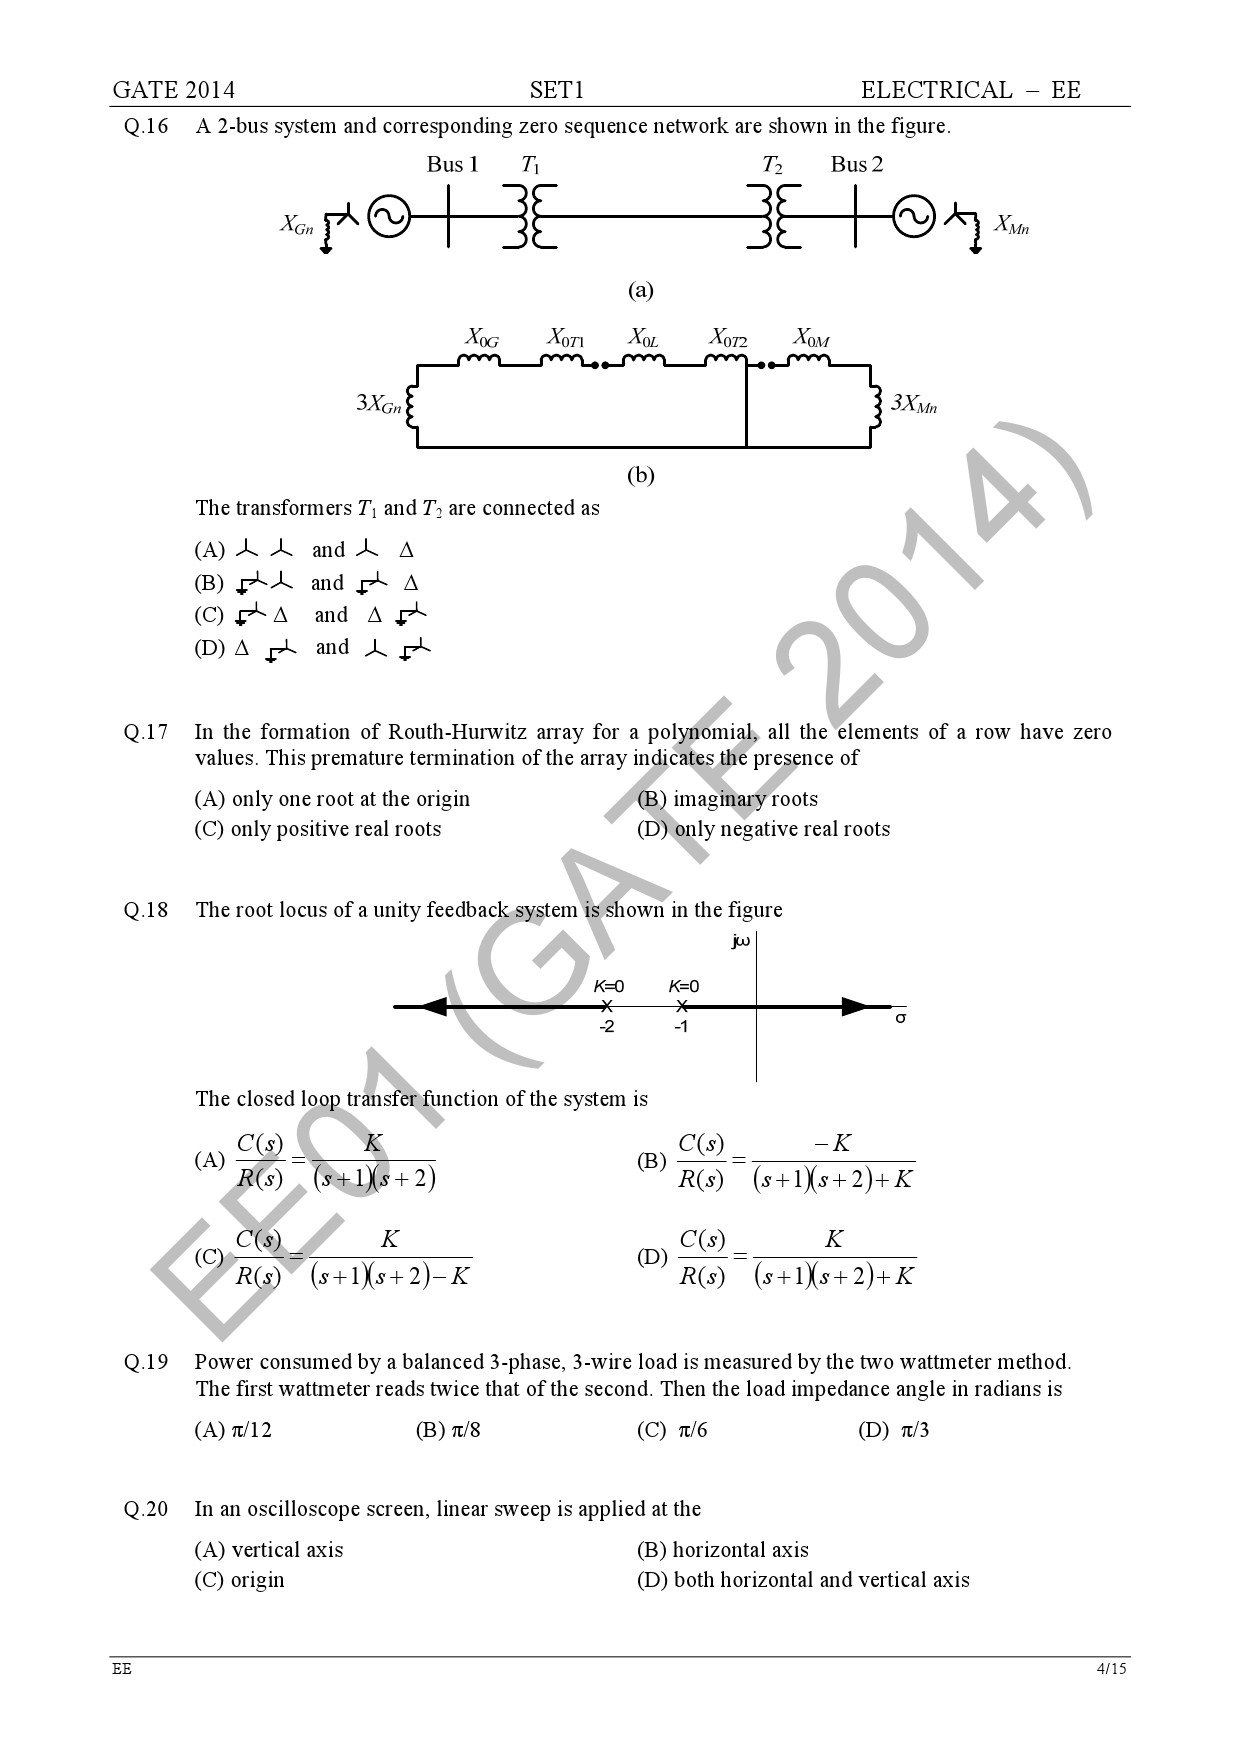 GATE Exam Question Paper 2014 Electrical Engineering Set 1 10